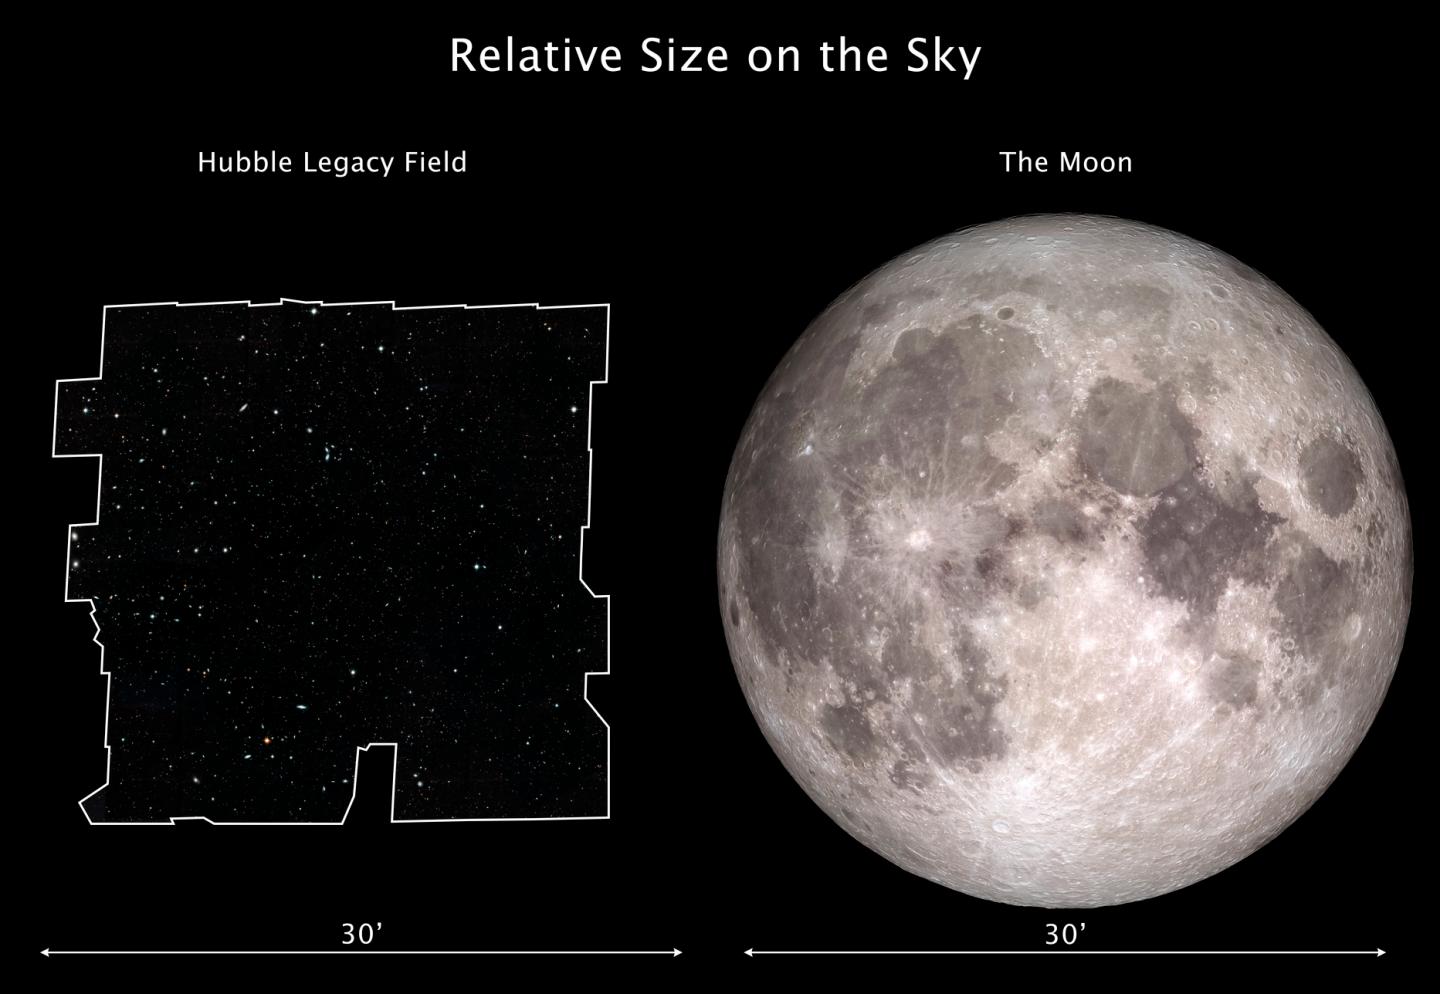 Hubble Legacy Field Relative Size on the Sky